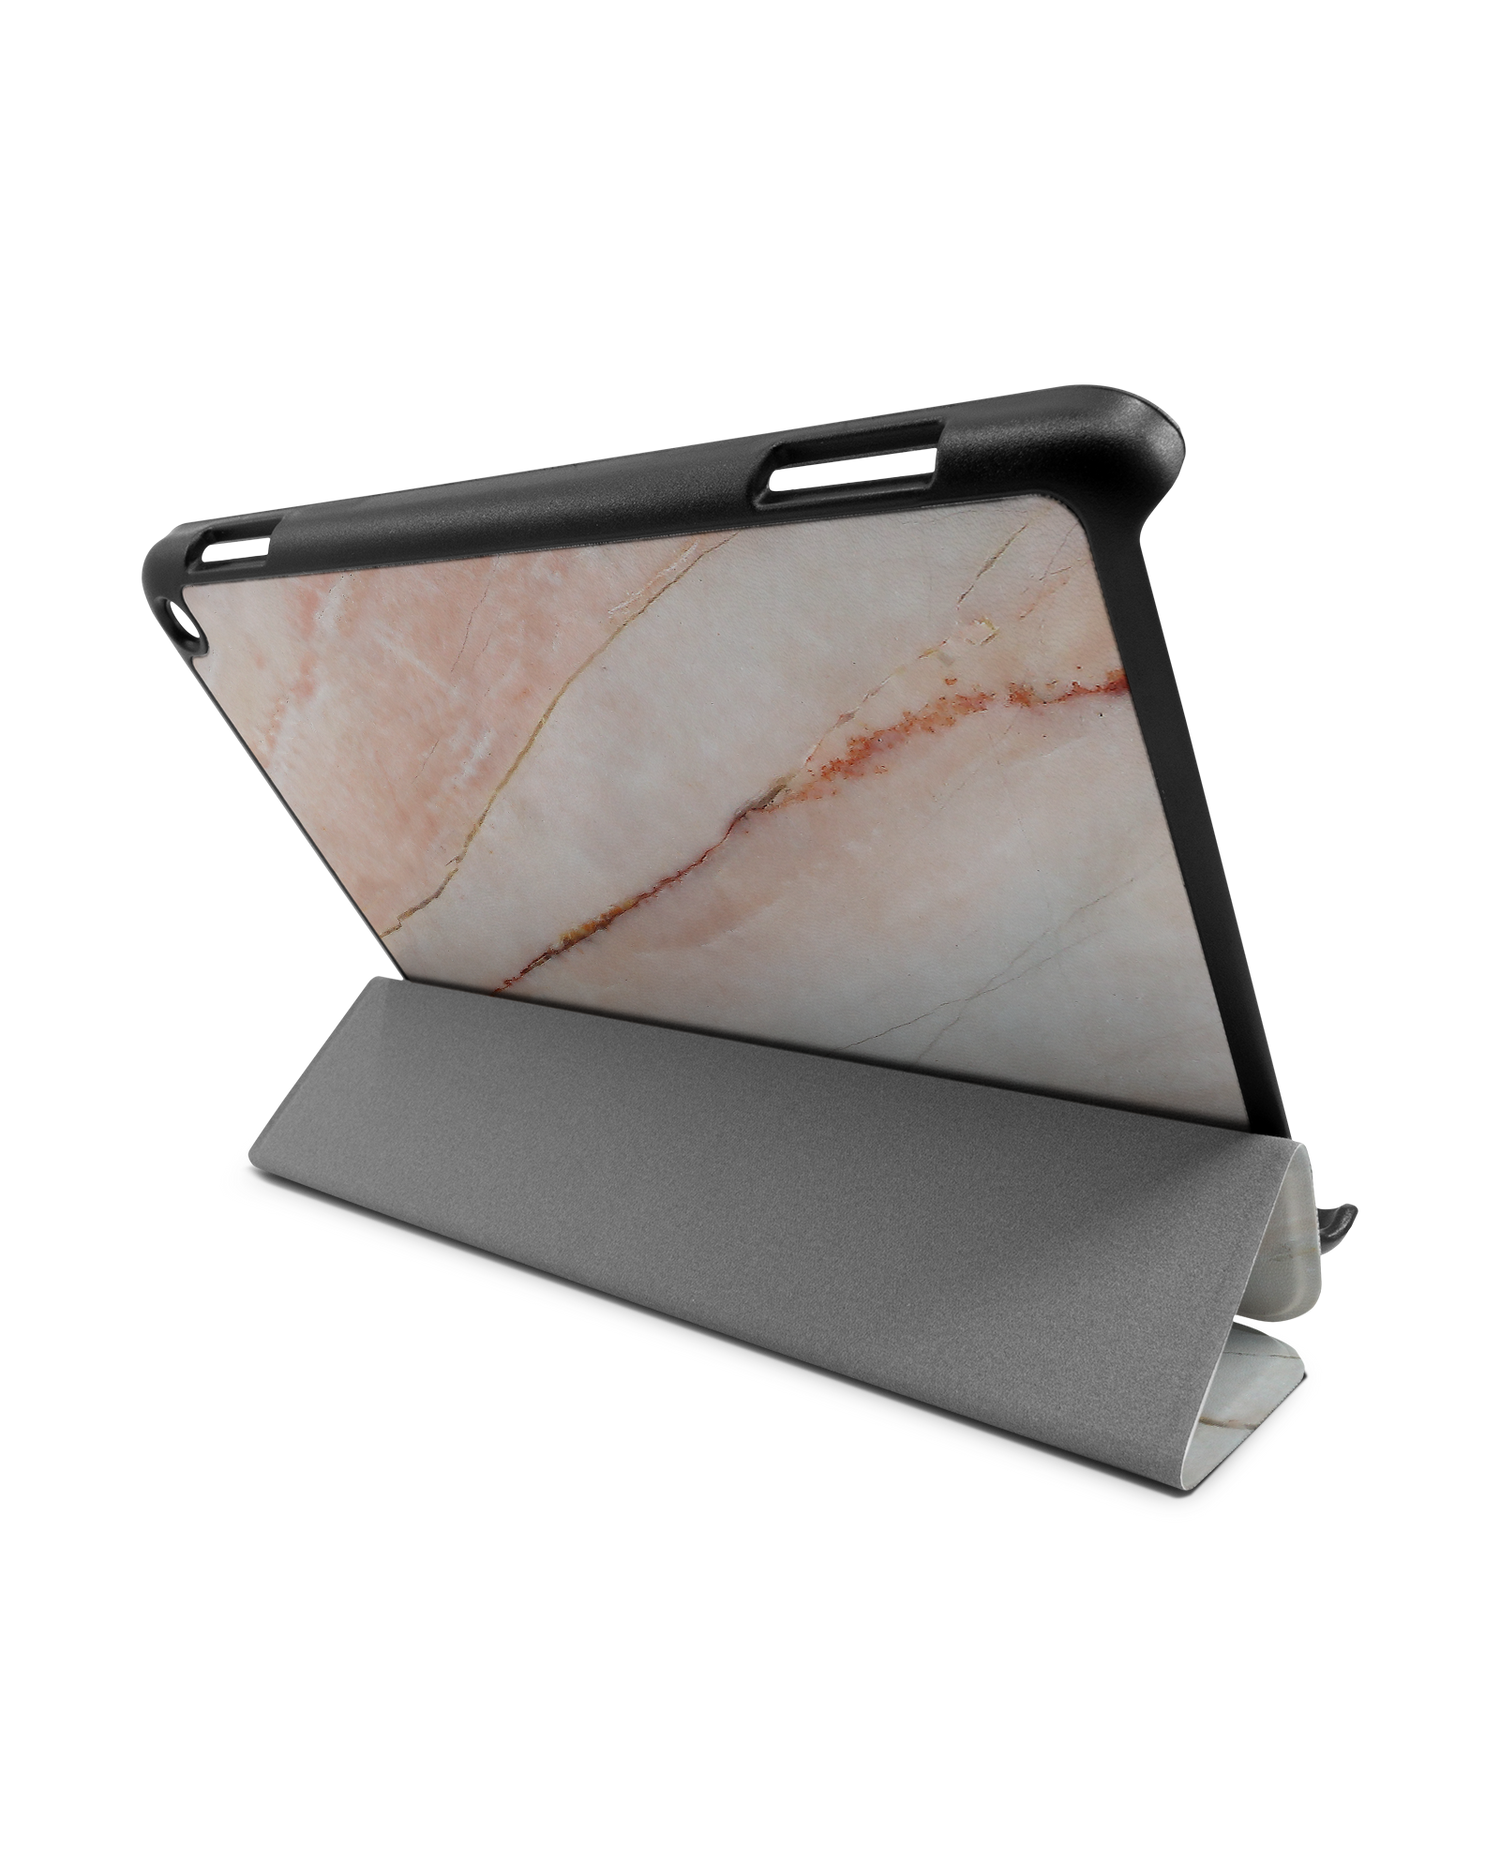 Mother of Pearl Marble Tablet Smart Case für Amazon Fire HD 8 (2022), Amazon Fire HD 8 Plus (2022), Amazon Fire HD 8 (2020), Amazon Fire HD 8 Plus (2020): Aufgestellt im Querformat